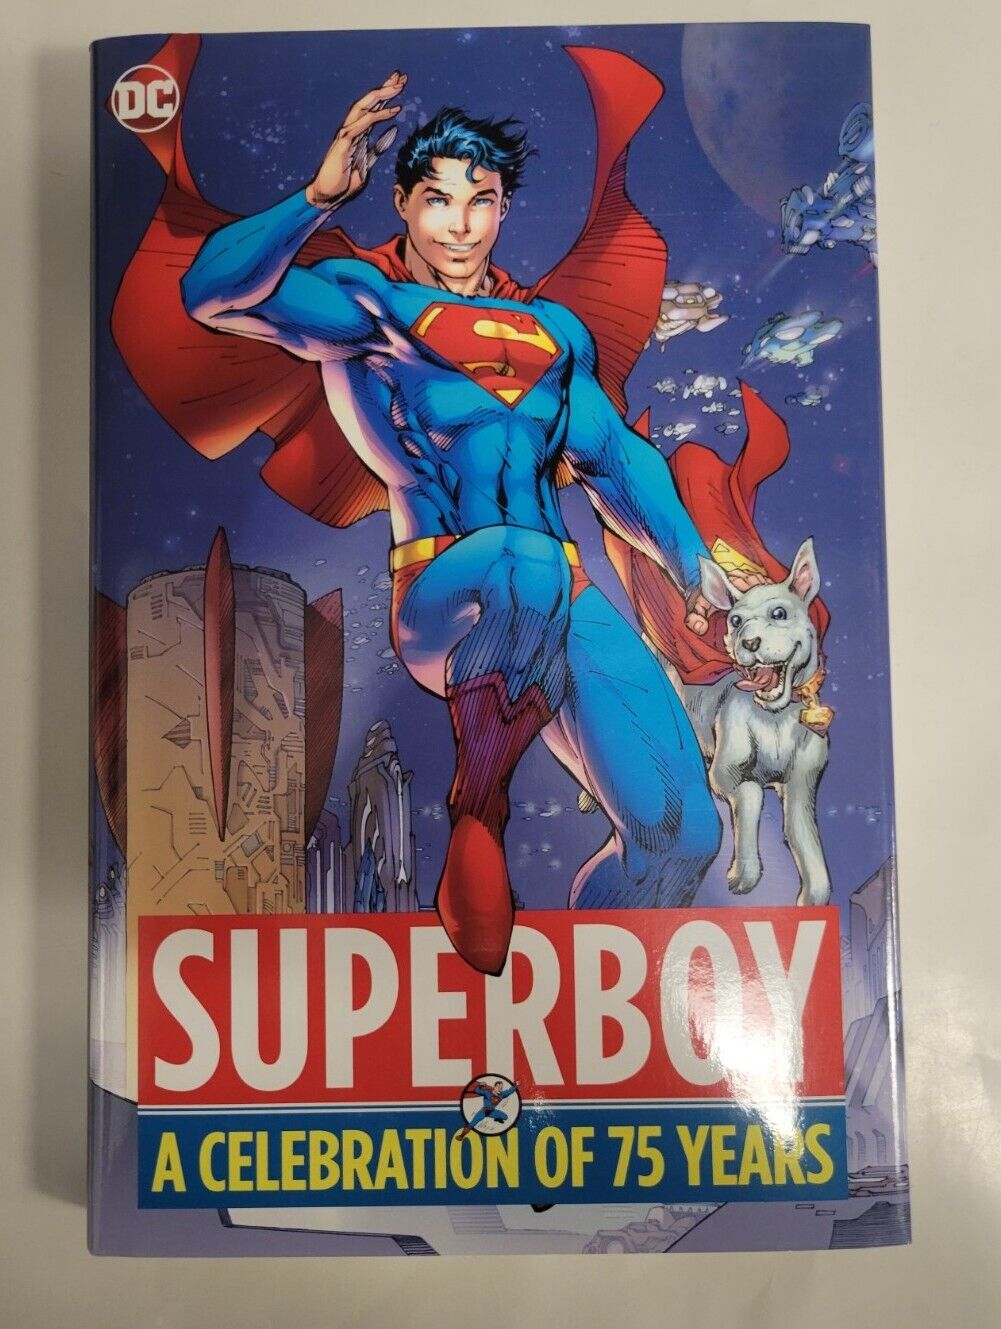 Superboy - A CELEBRATION OF 75 YEARS - Hardcover - DC - Graphic Novel